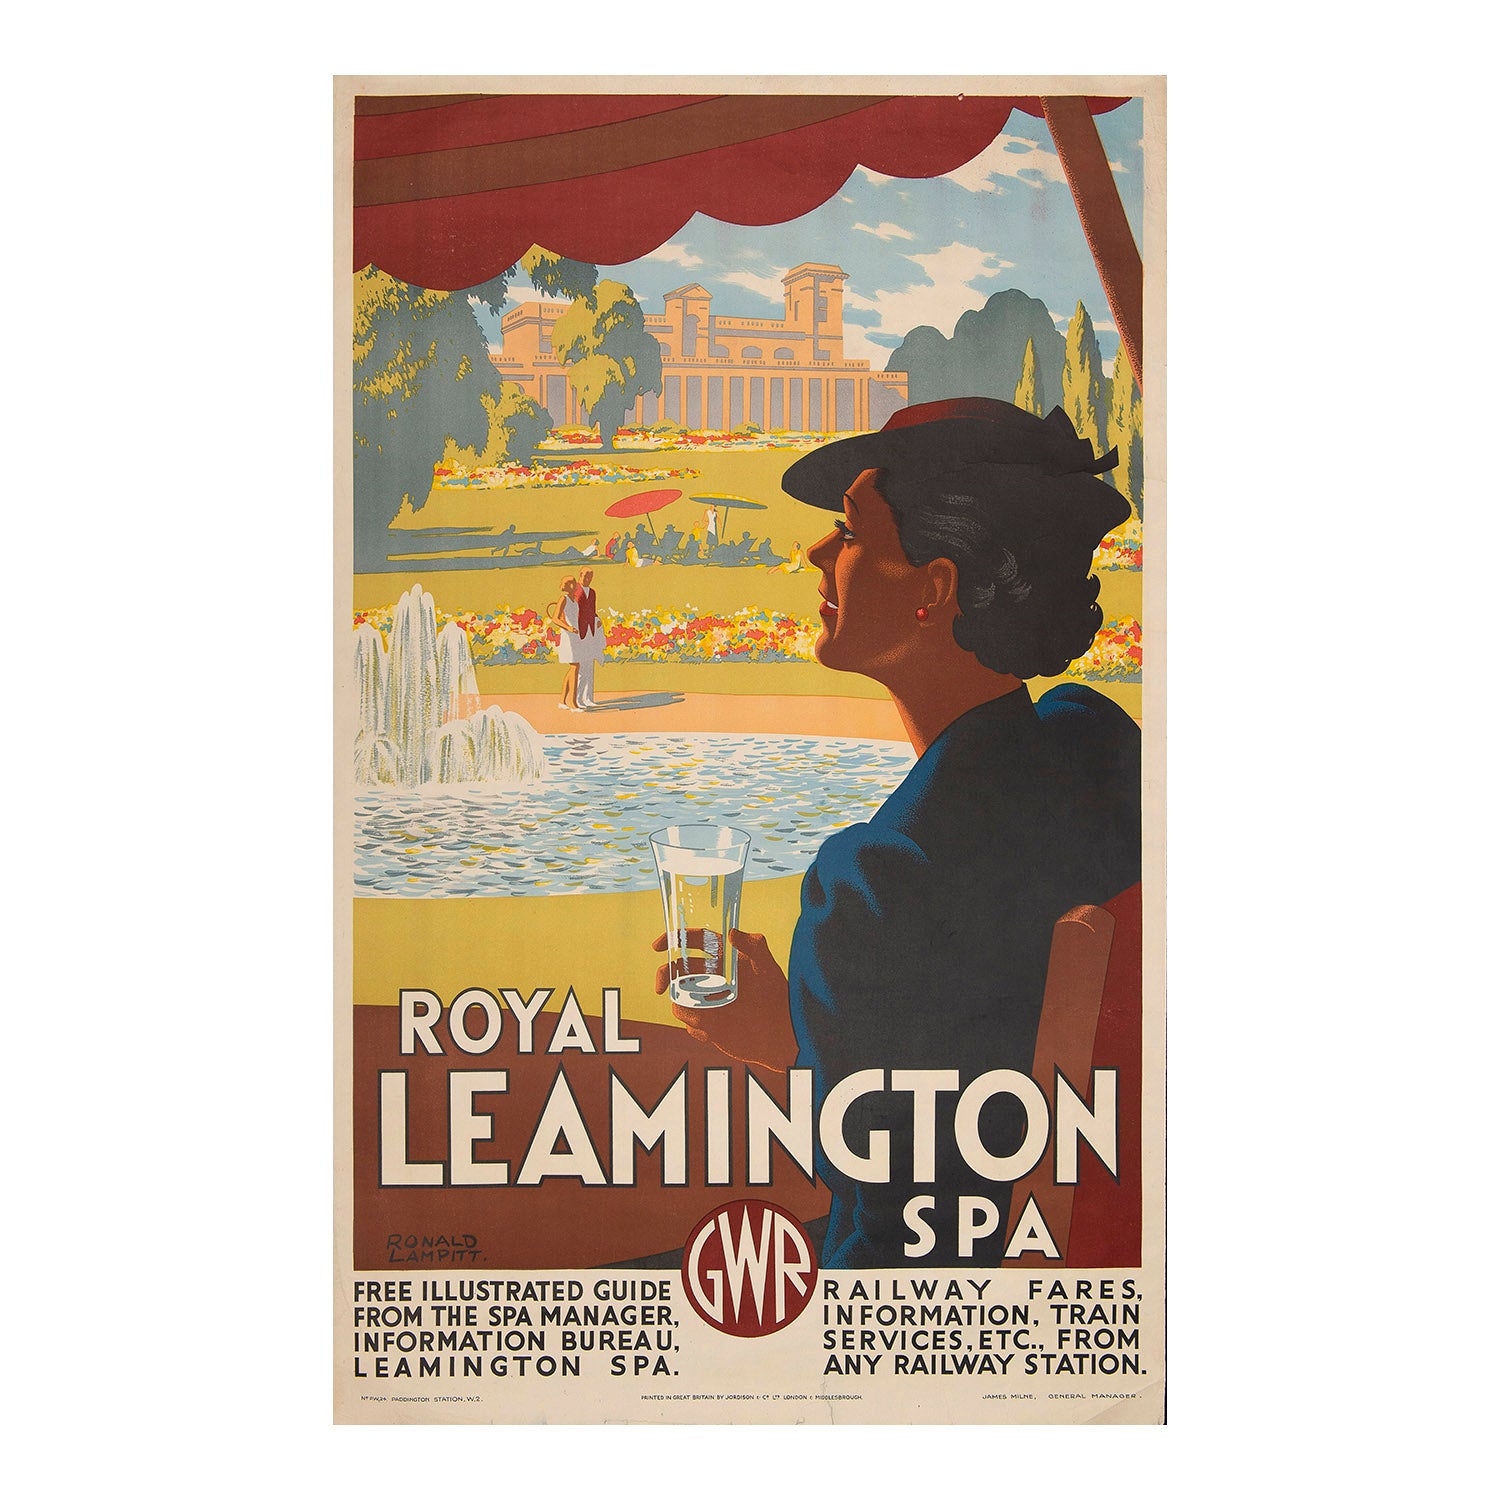 Great Western Railway poster promoting the health qualities of Royal Leamington Spa (Warwickshire), designed by the English artist and illustrator Ronald Lampitt, c.1937. A classic railway poster of the era, depicting a fashionably dressed lady drinking a glass of spa water with the famous Leamington Spa Pump Rooms in the background. 